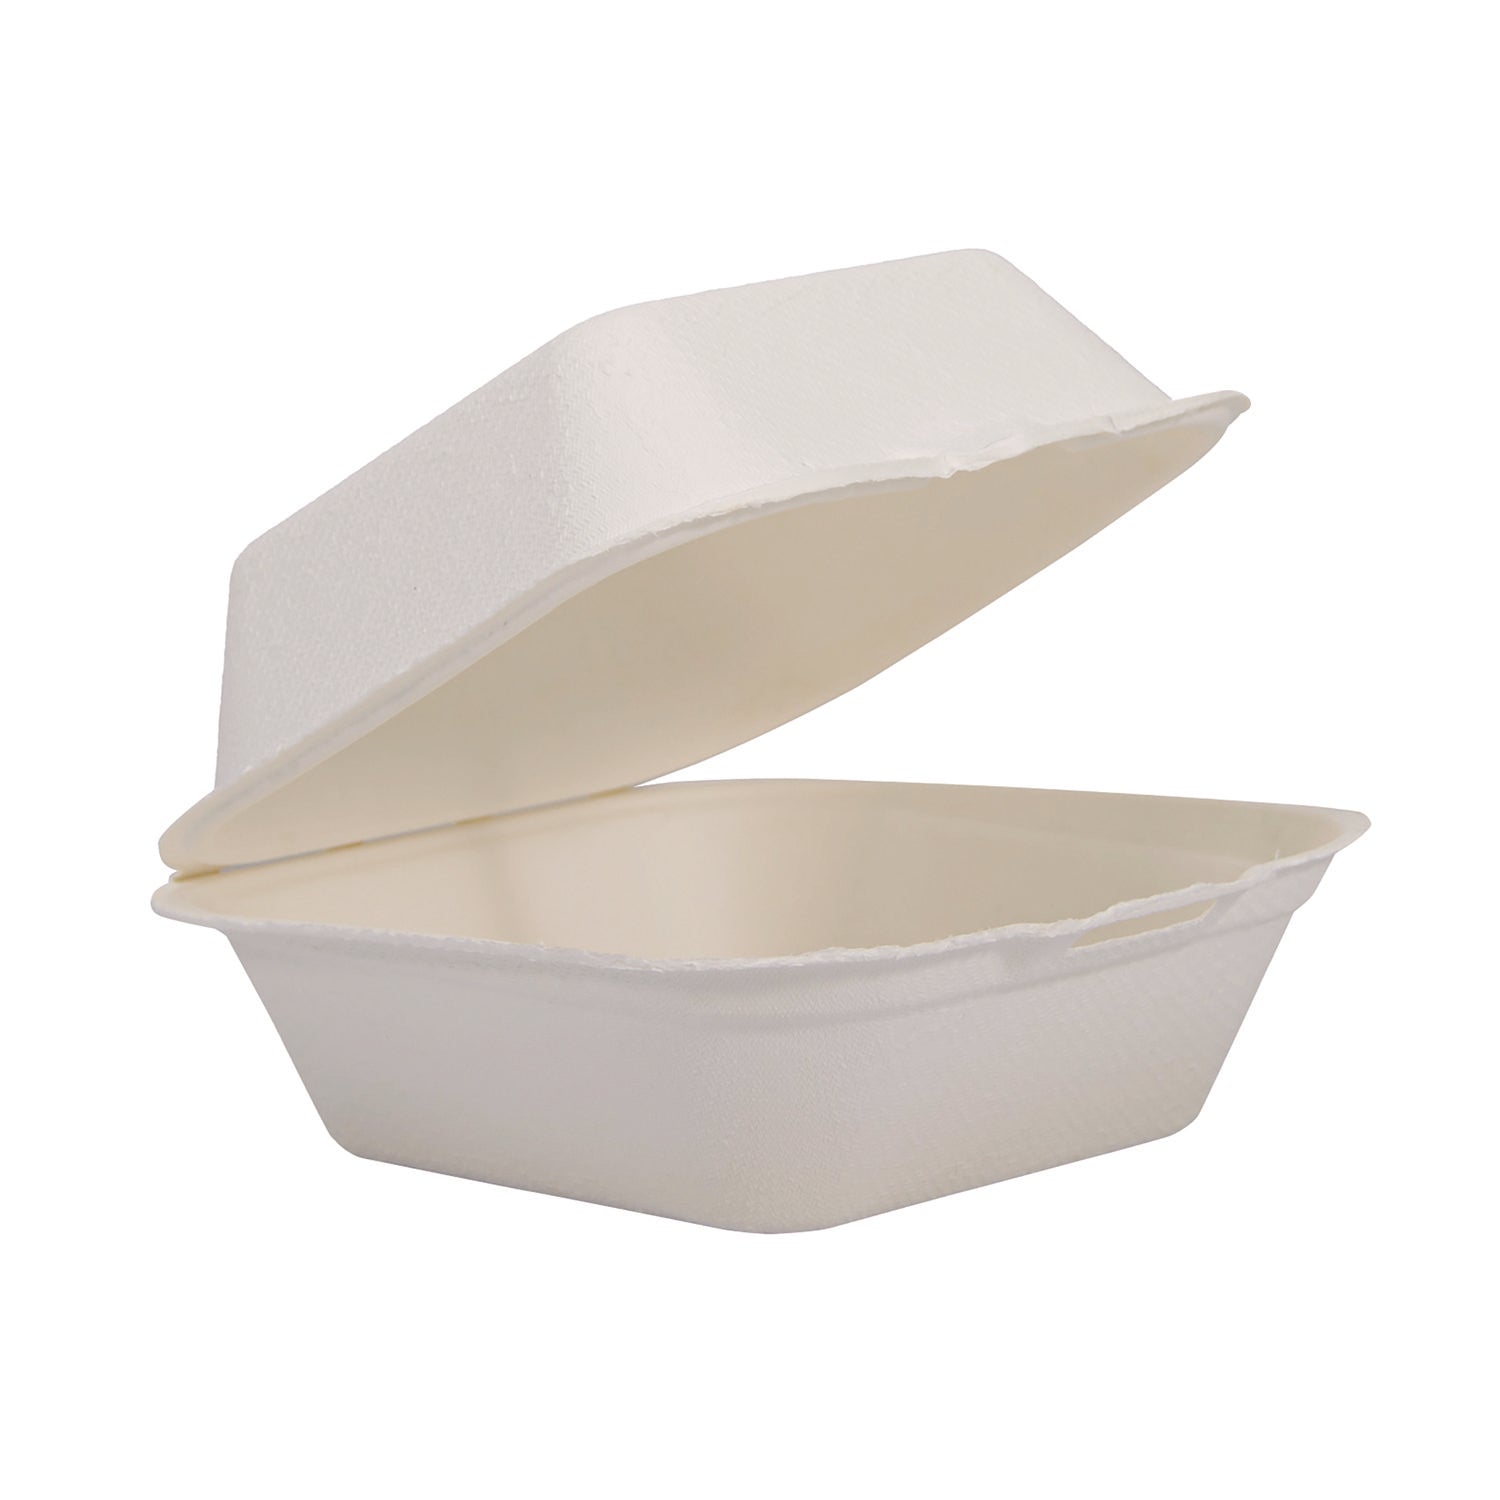 compostable-fiber-hinged-trays-proplanet-seal-59-x-608-x-183-ivory-molded-fiber-500-carton_dcchc6fbr1 - 1